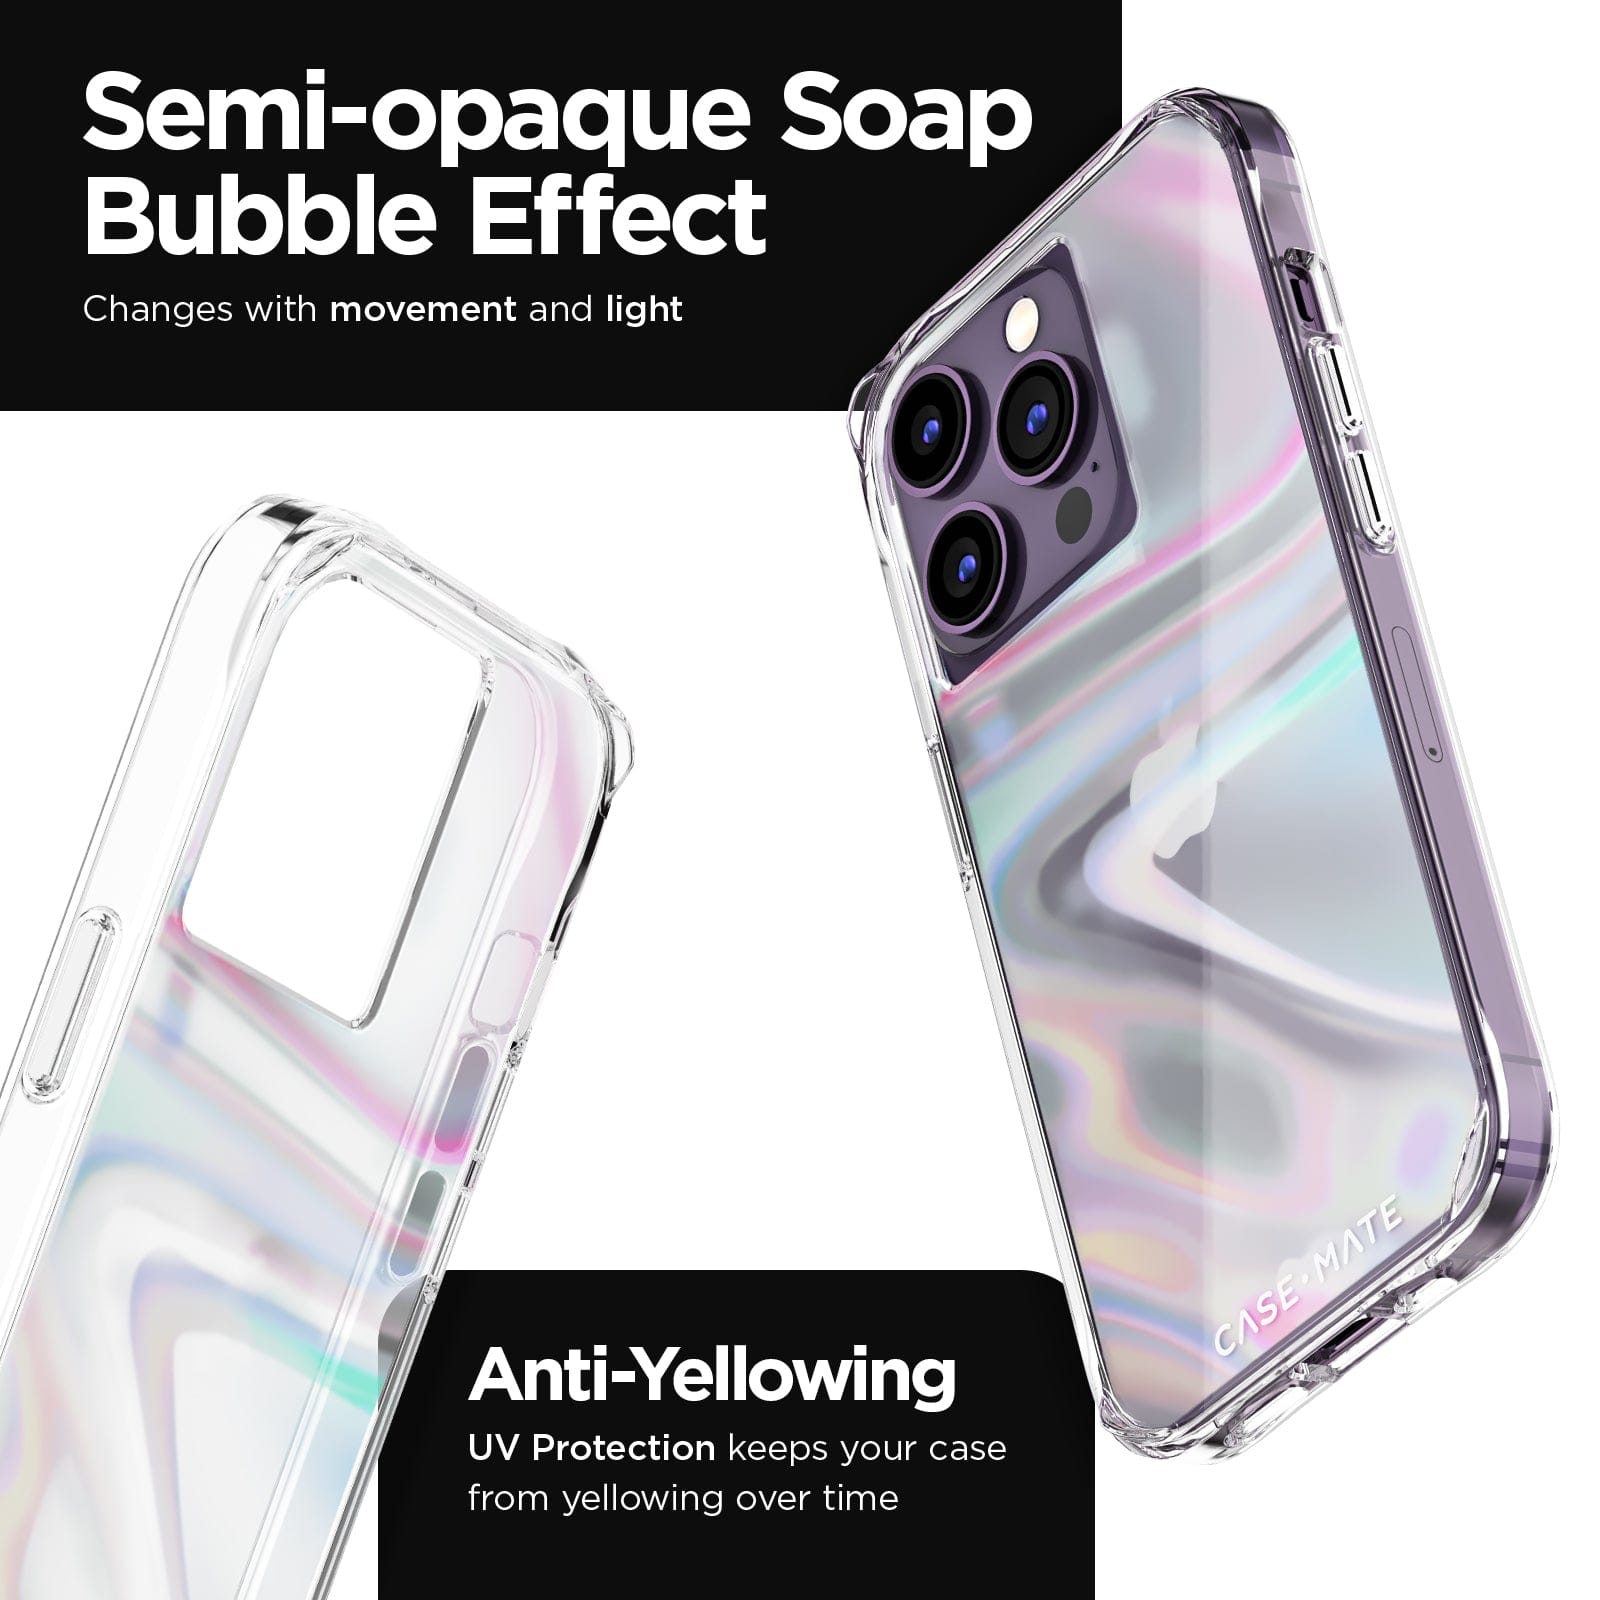 SEMI-OPAQUE SOAP BUBBLE EFFECT CHANGES WITH MOVEMENT AND LIGHT. ANTI-YELLOWING UV PROTECTION KEEPS YOUR CASE FROM YELLOWING OVER TIME. 